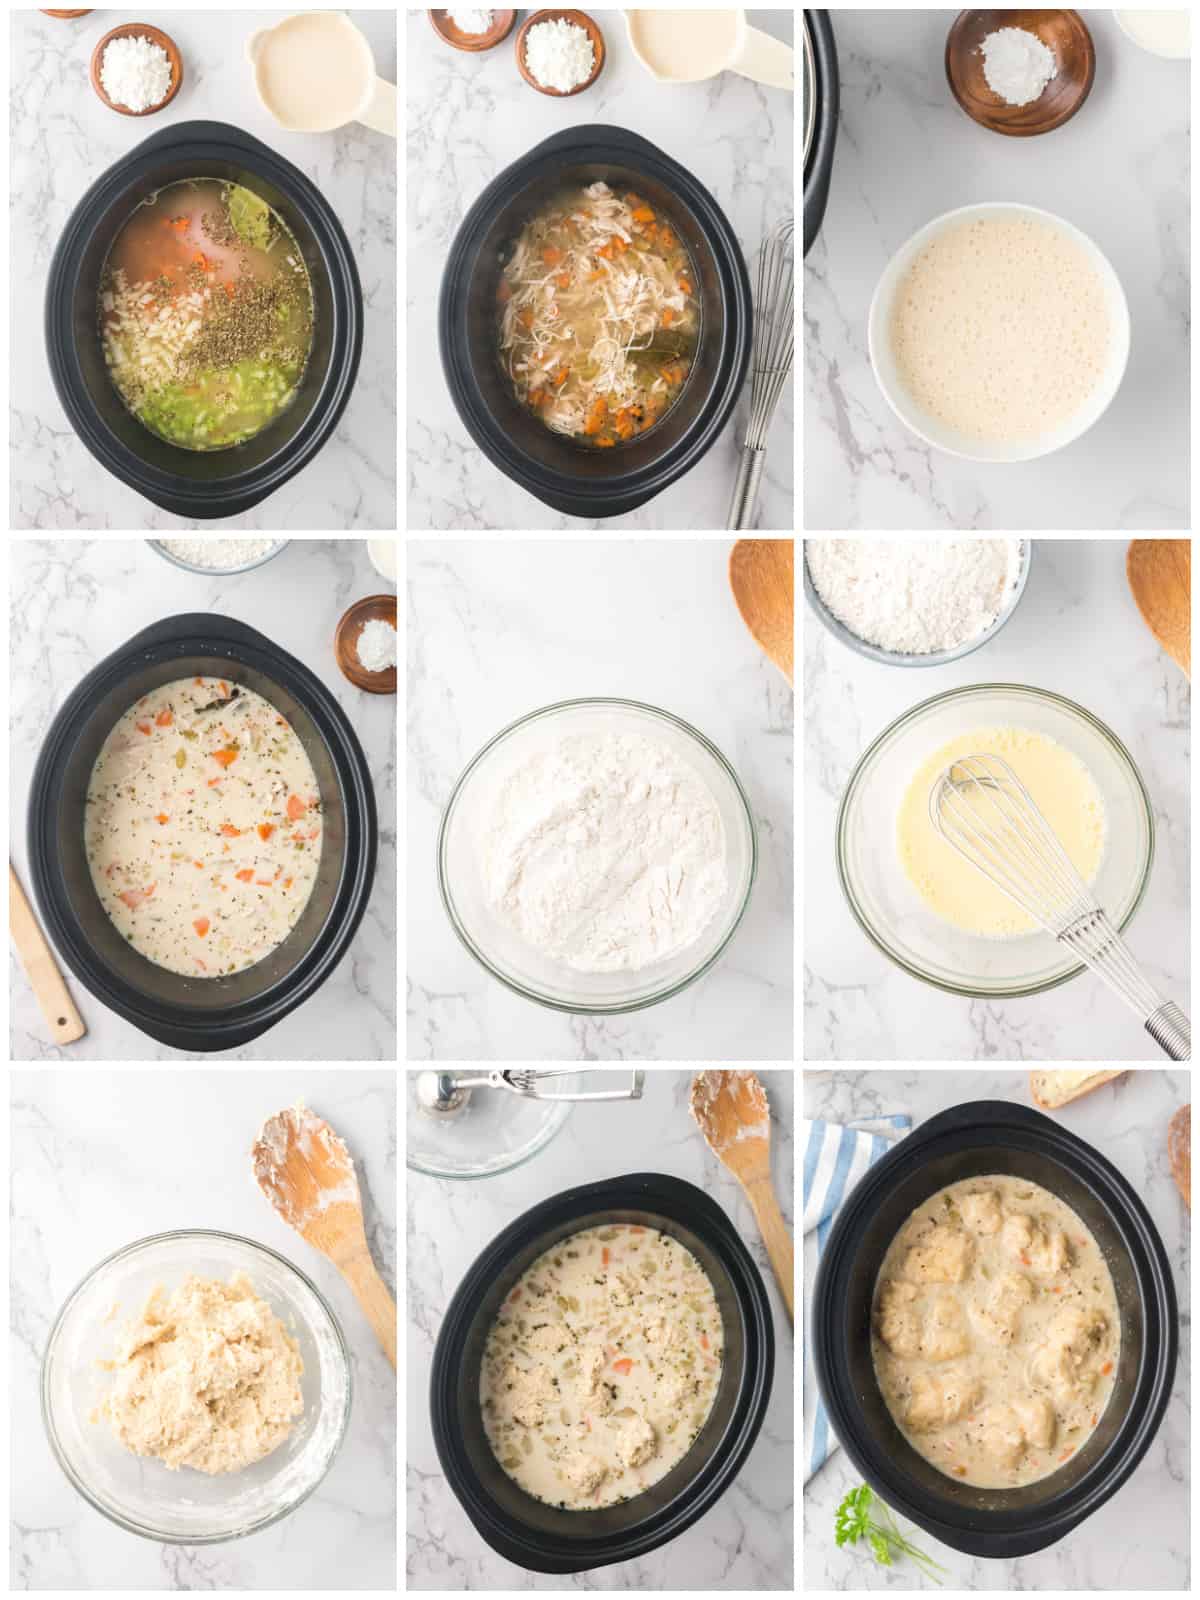 Step by step photos on how to make Slow Cooker Chicken and Dumplings.